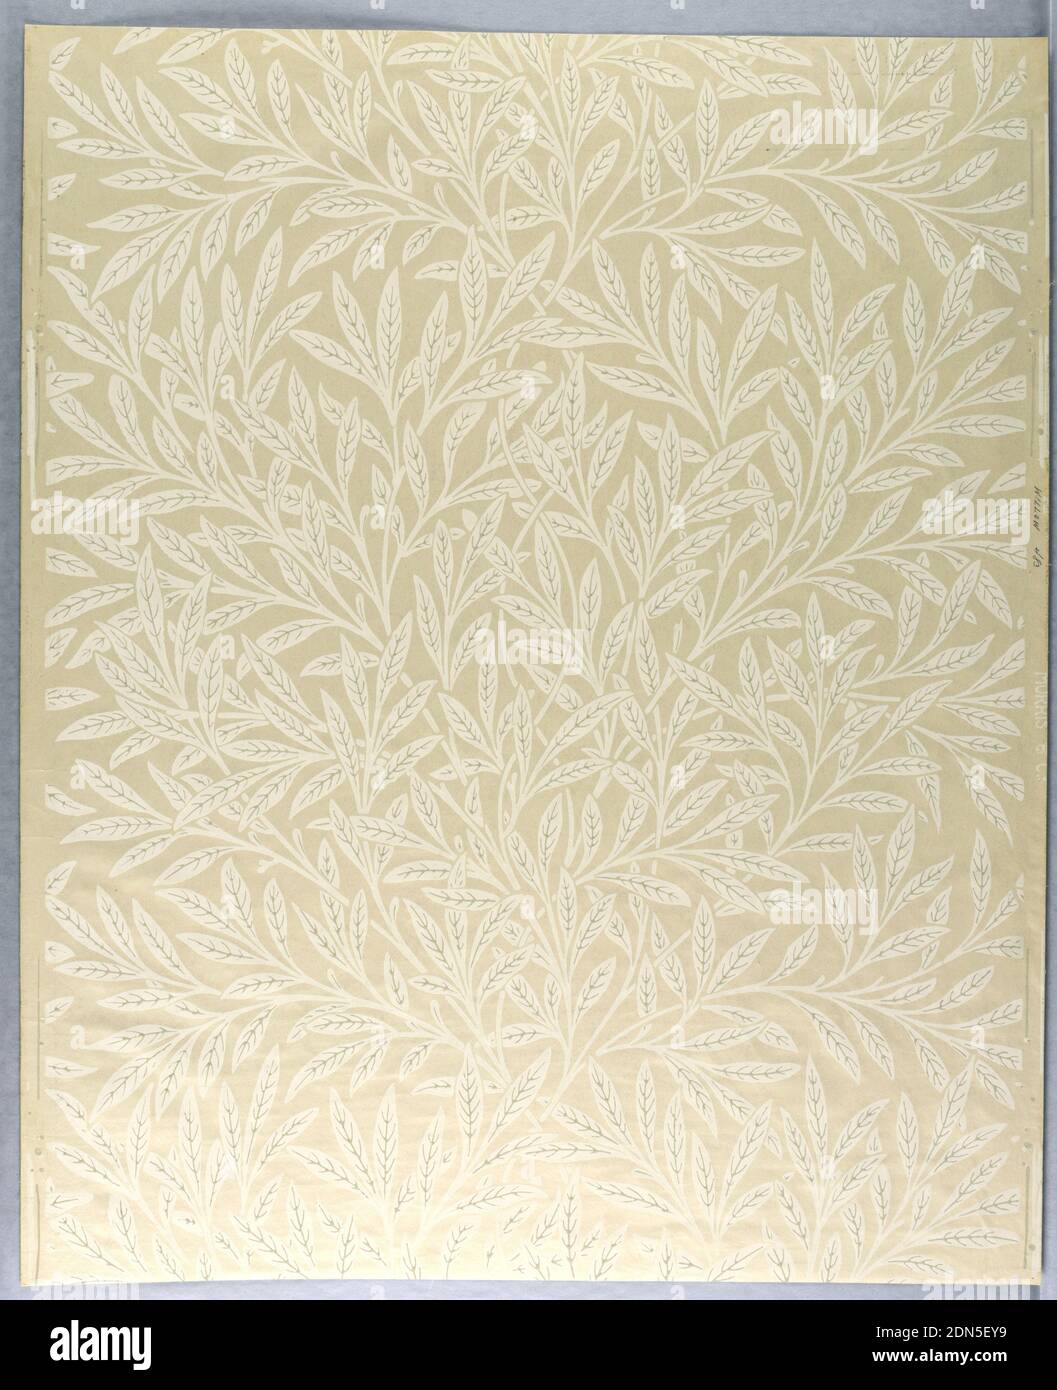 Willow, Block-printed on paper, Printed in white on white., England, 1874, Wallcoverings, Sidewall, Sidewall Stock Photo